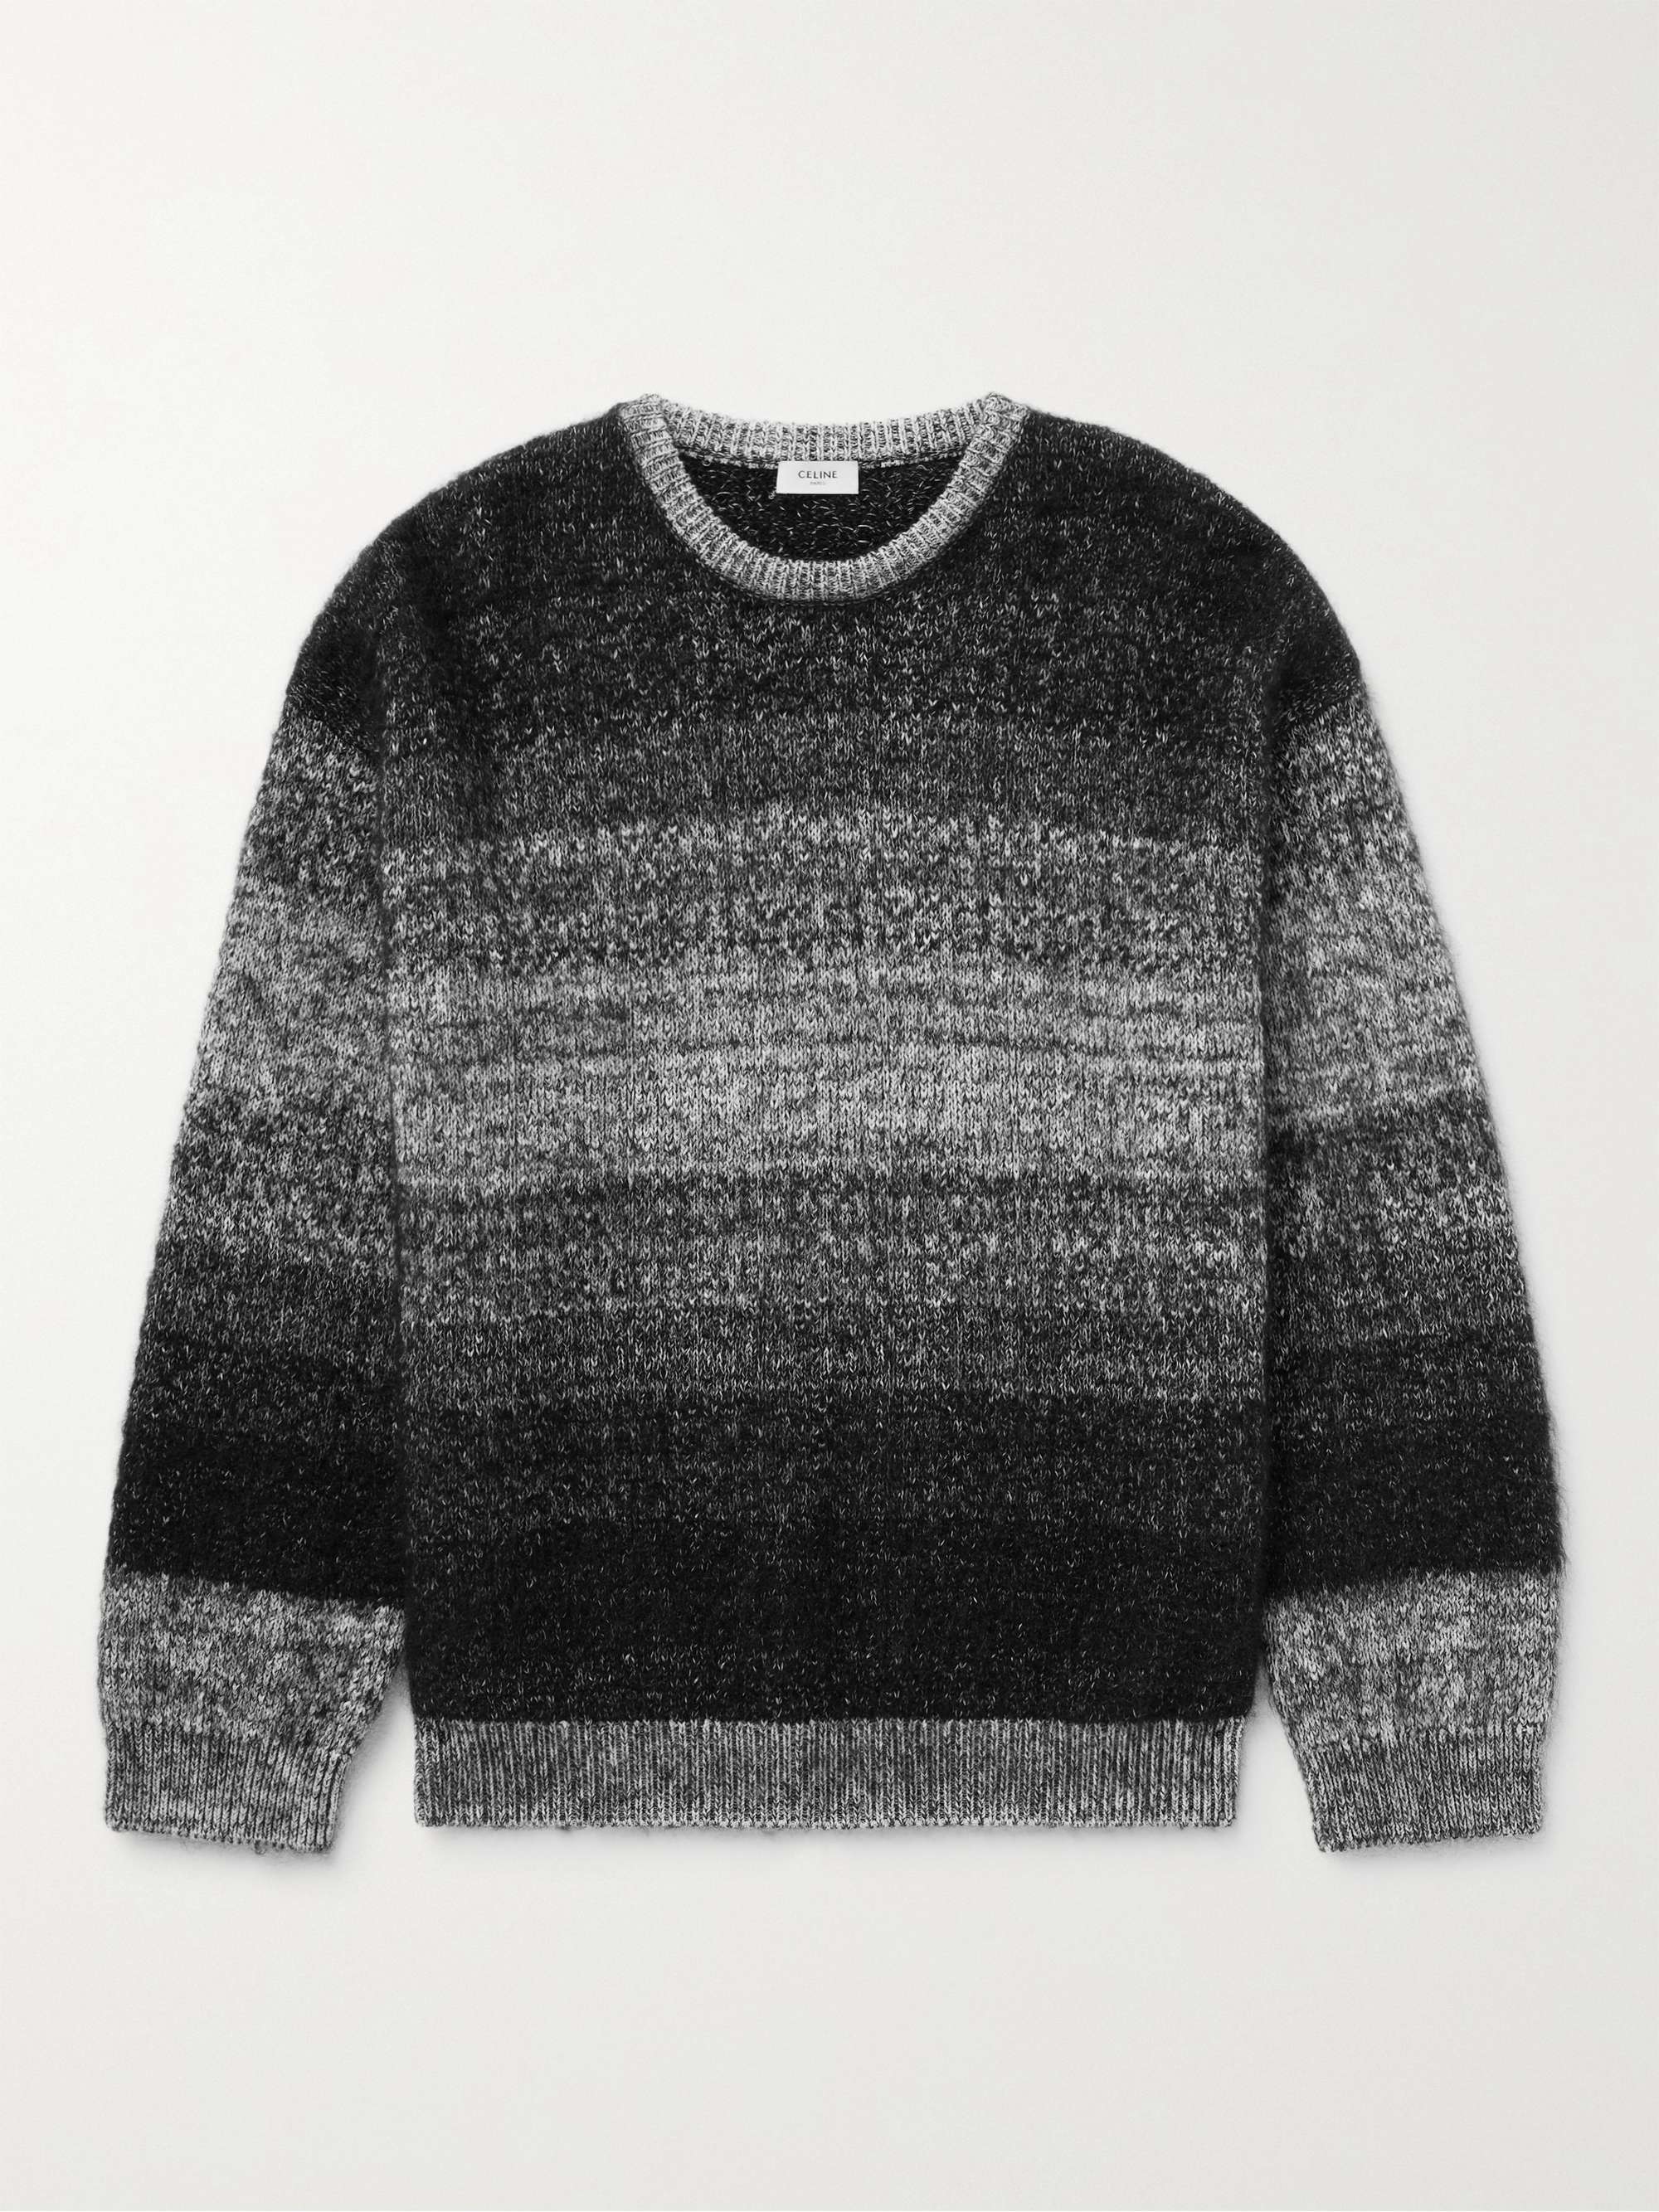 CELINE HOMME Oversized Striped Intarsia Cotton and Mohair-Blend Sweater